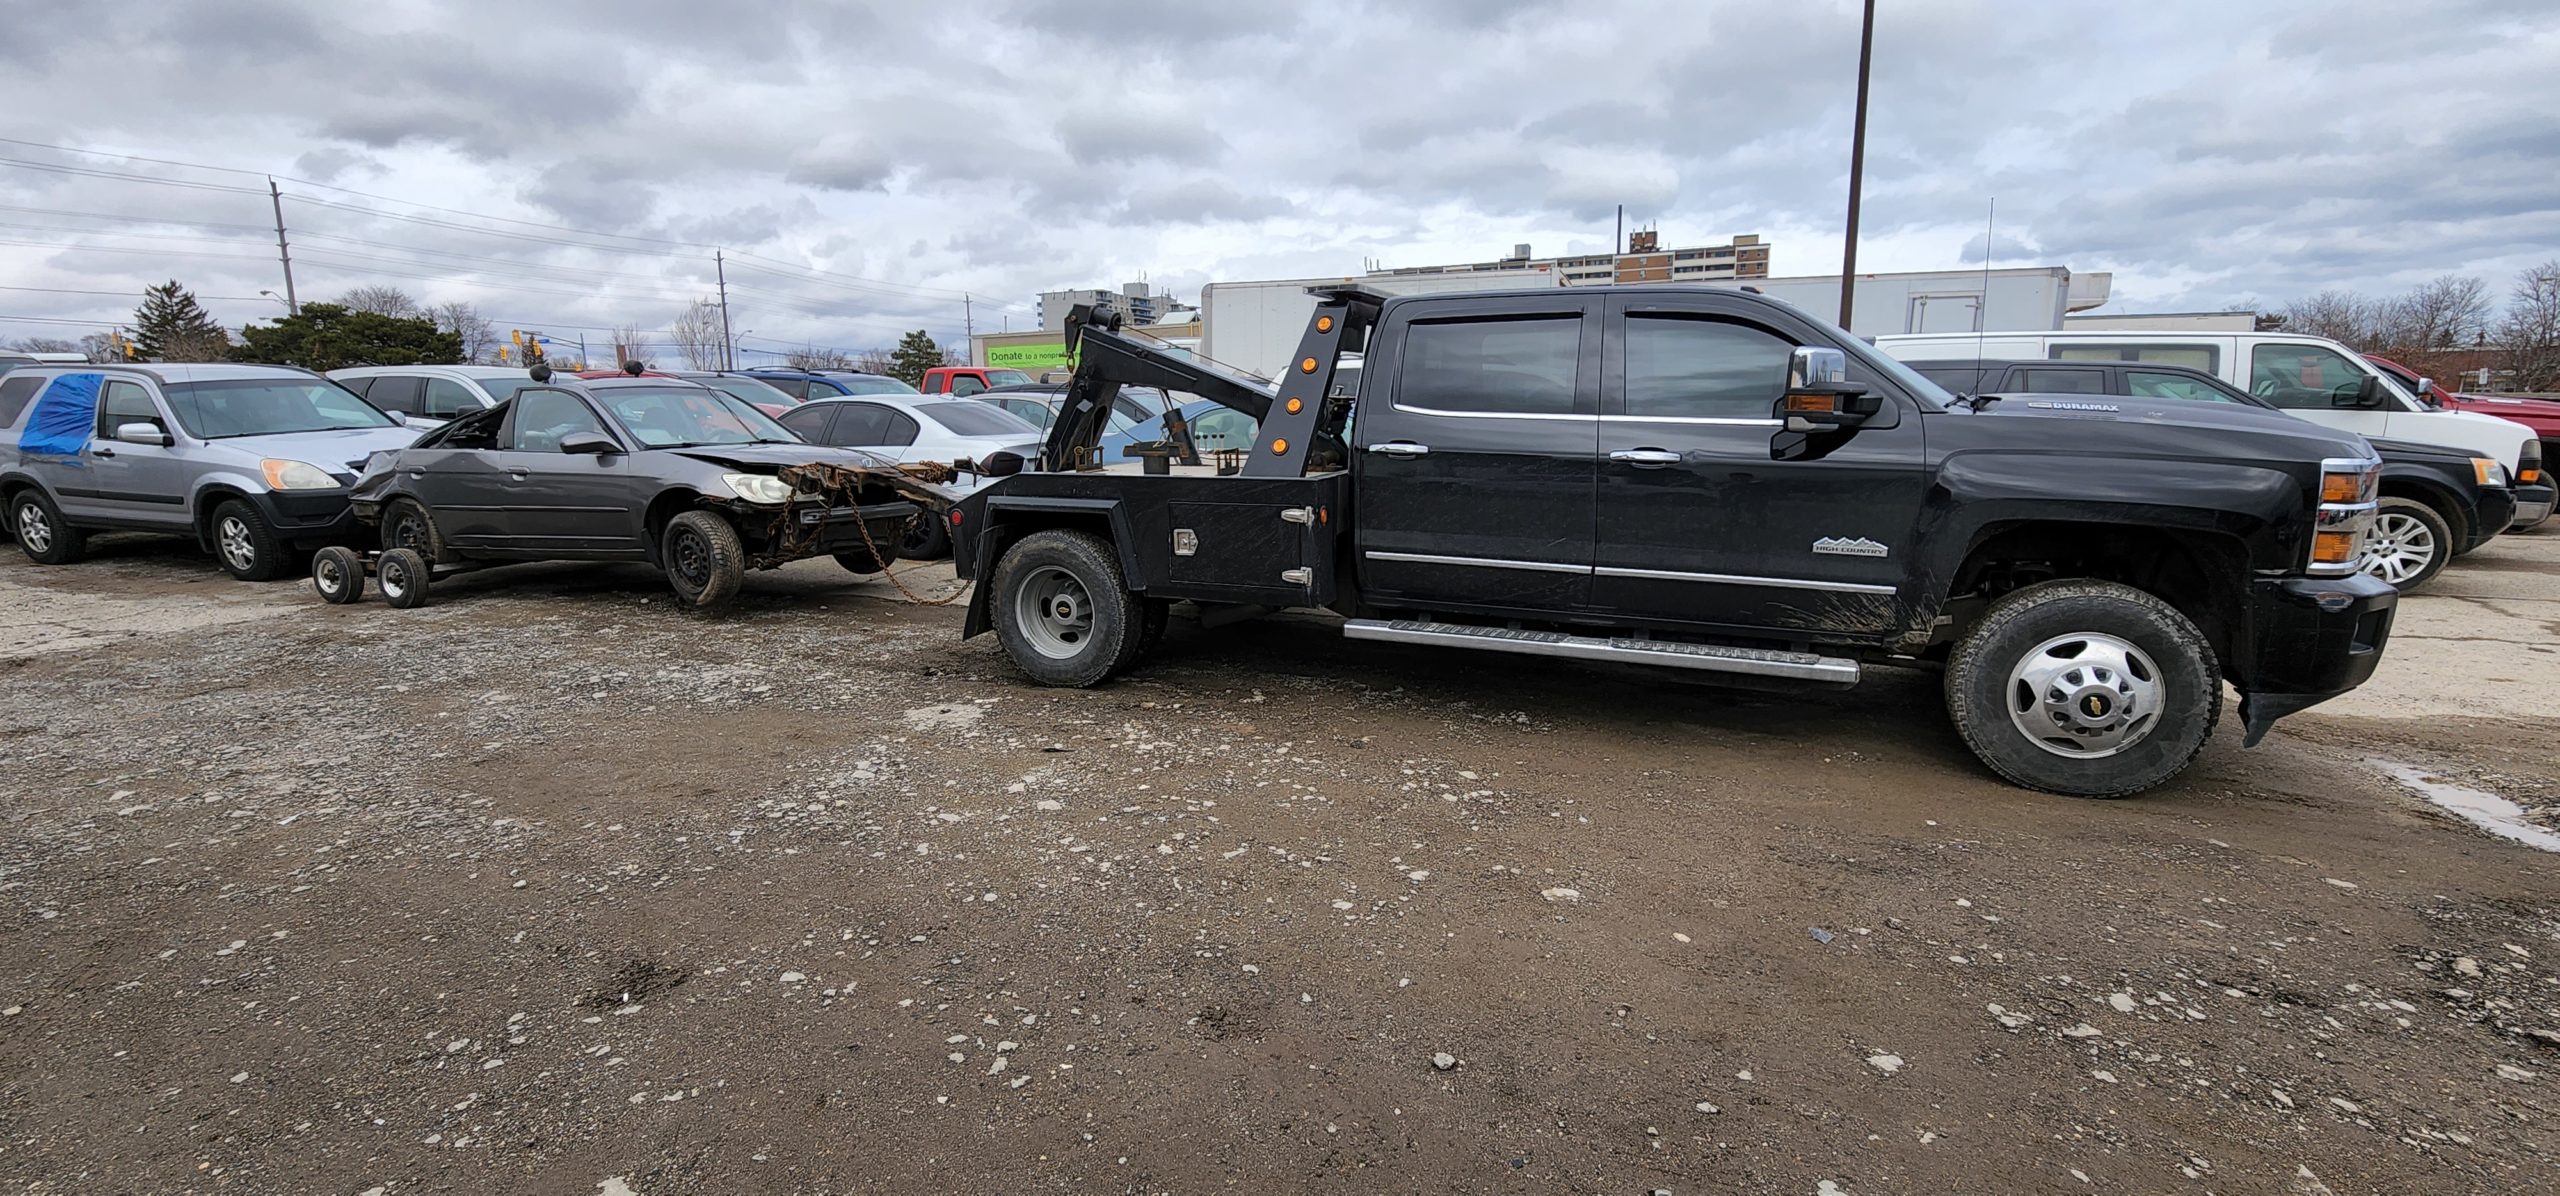 AKR Towing and Scrap Car Removal services